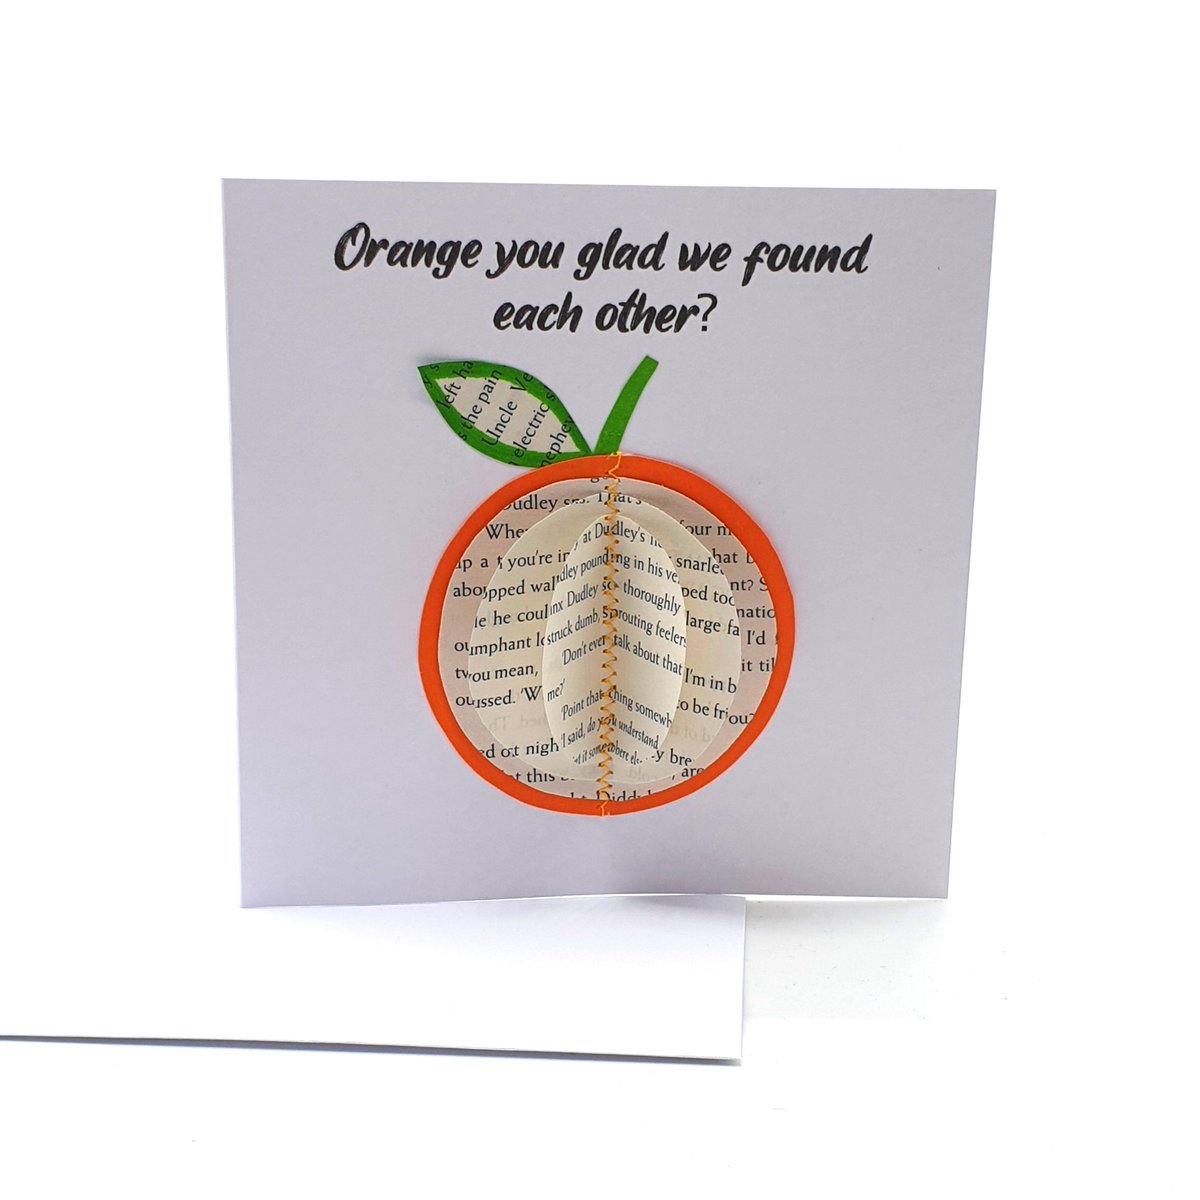 Orange Fruit Card Gift creatoncrafts.com/products/orang… #mhhsbd #CreatonCrafts #Shopify #PaperDecorations